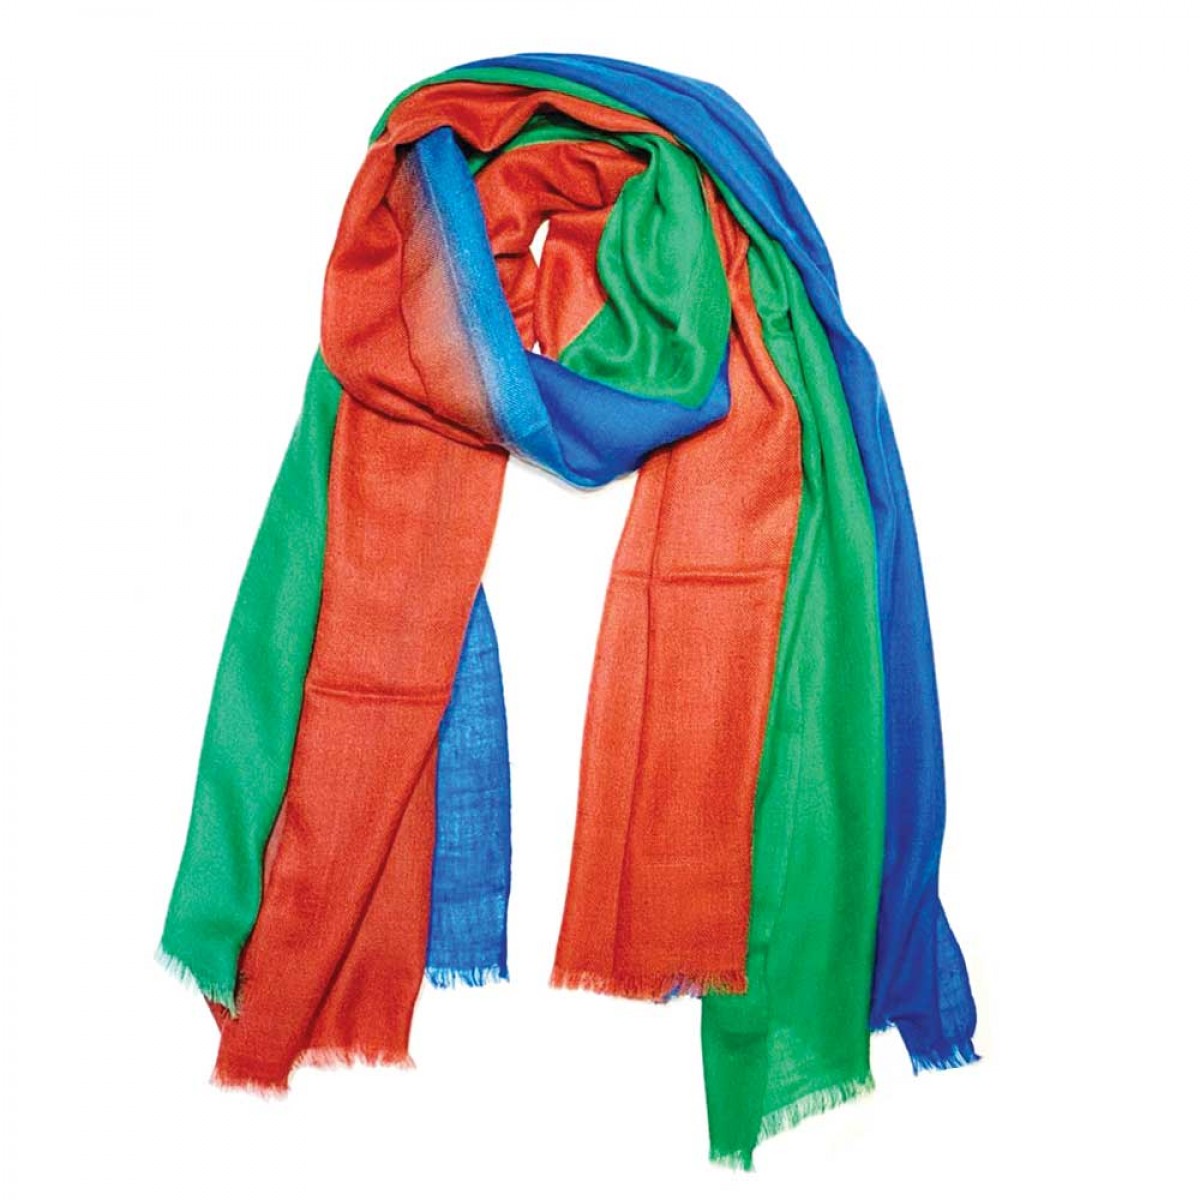 Ombre Pashmina Shawl - Green Red & Blue